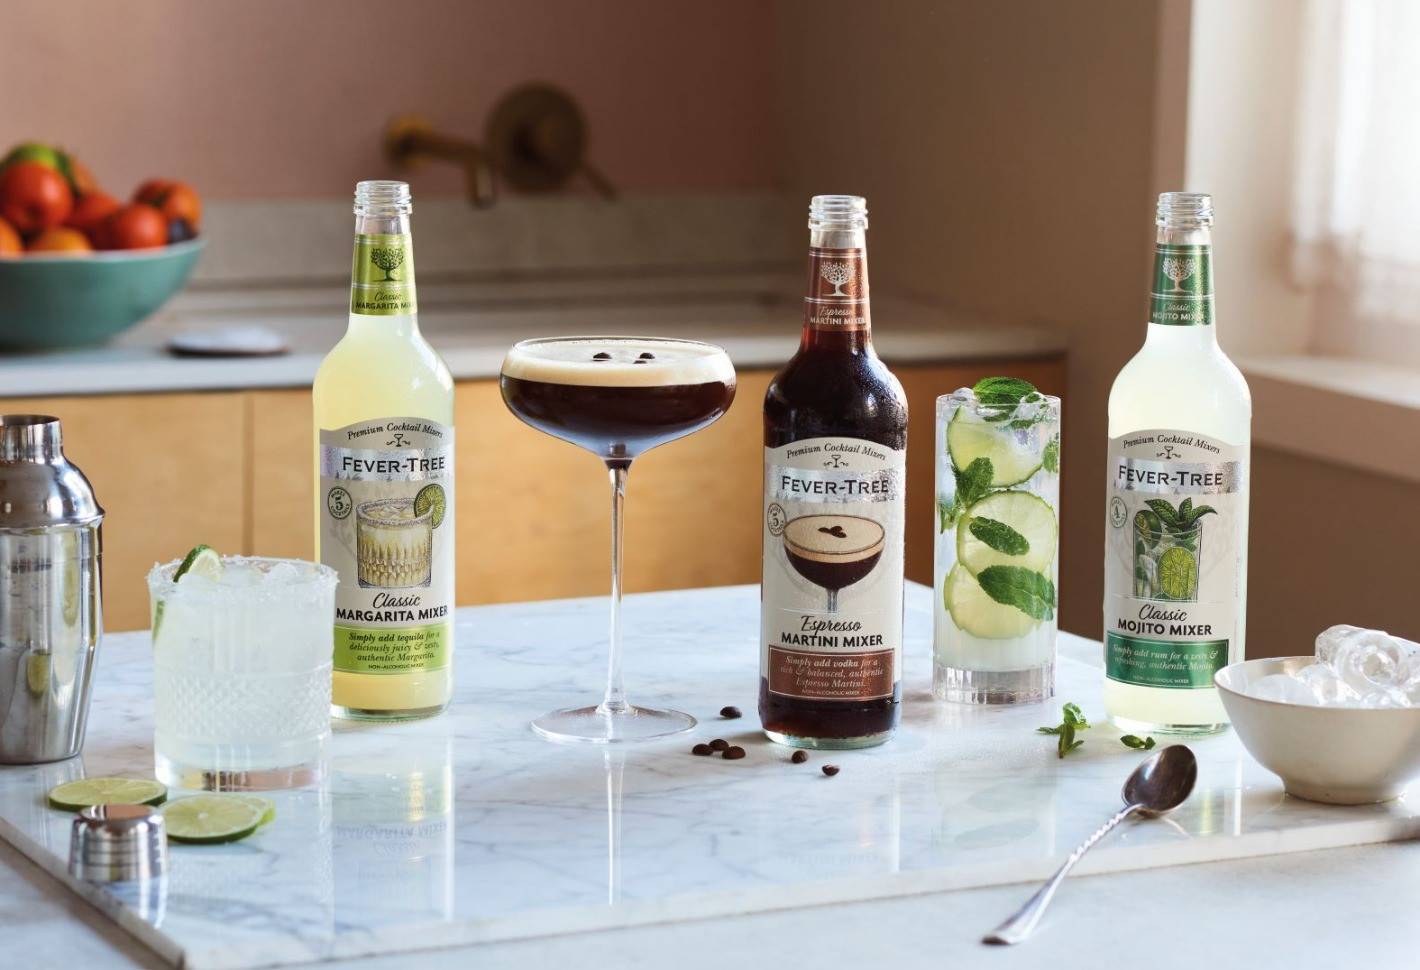 Fever-Tree launches two new cocktail mixer flavours – Warungku Terkini